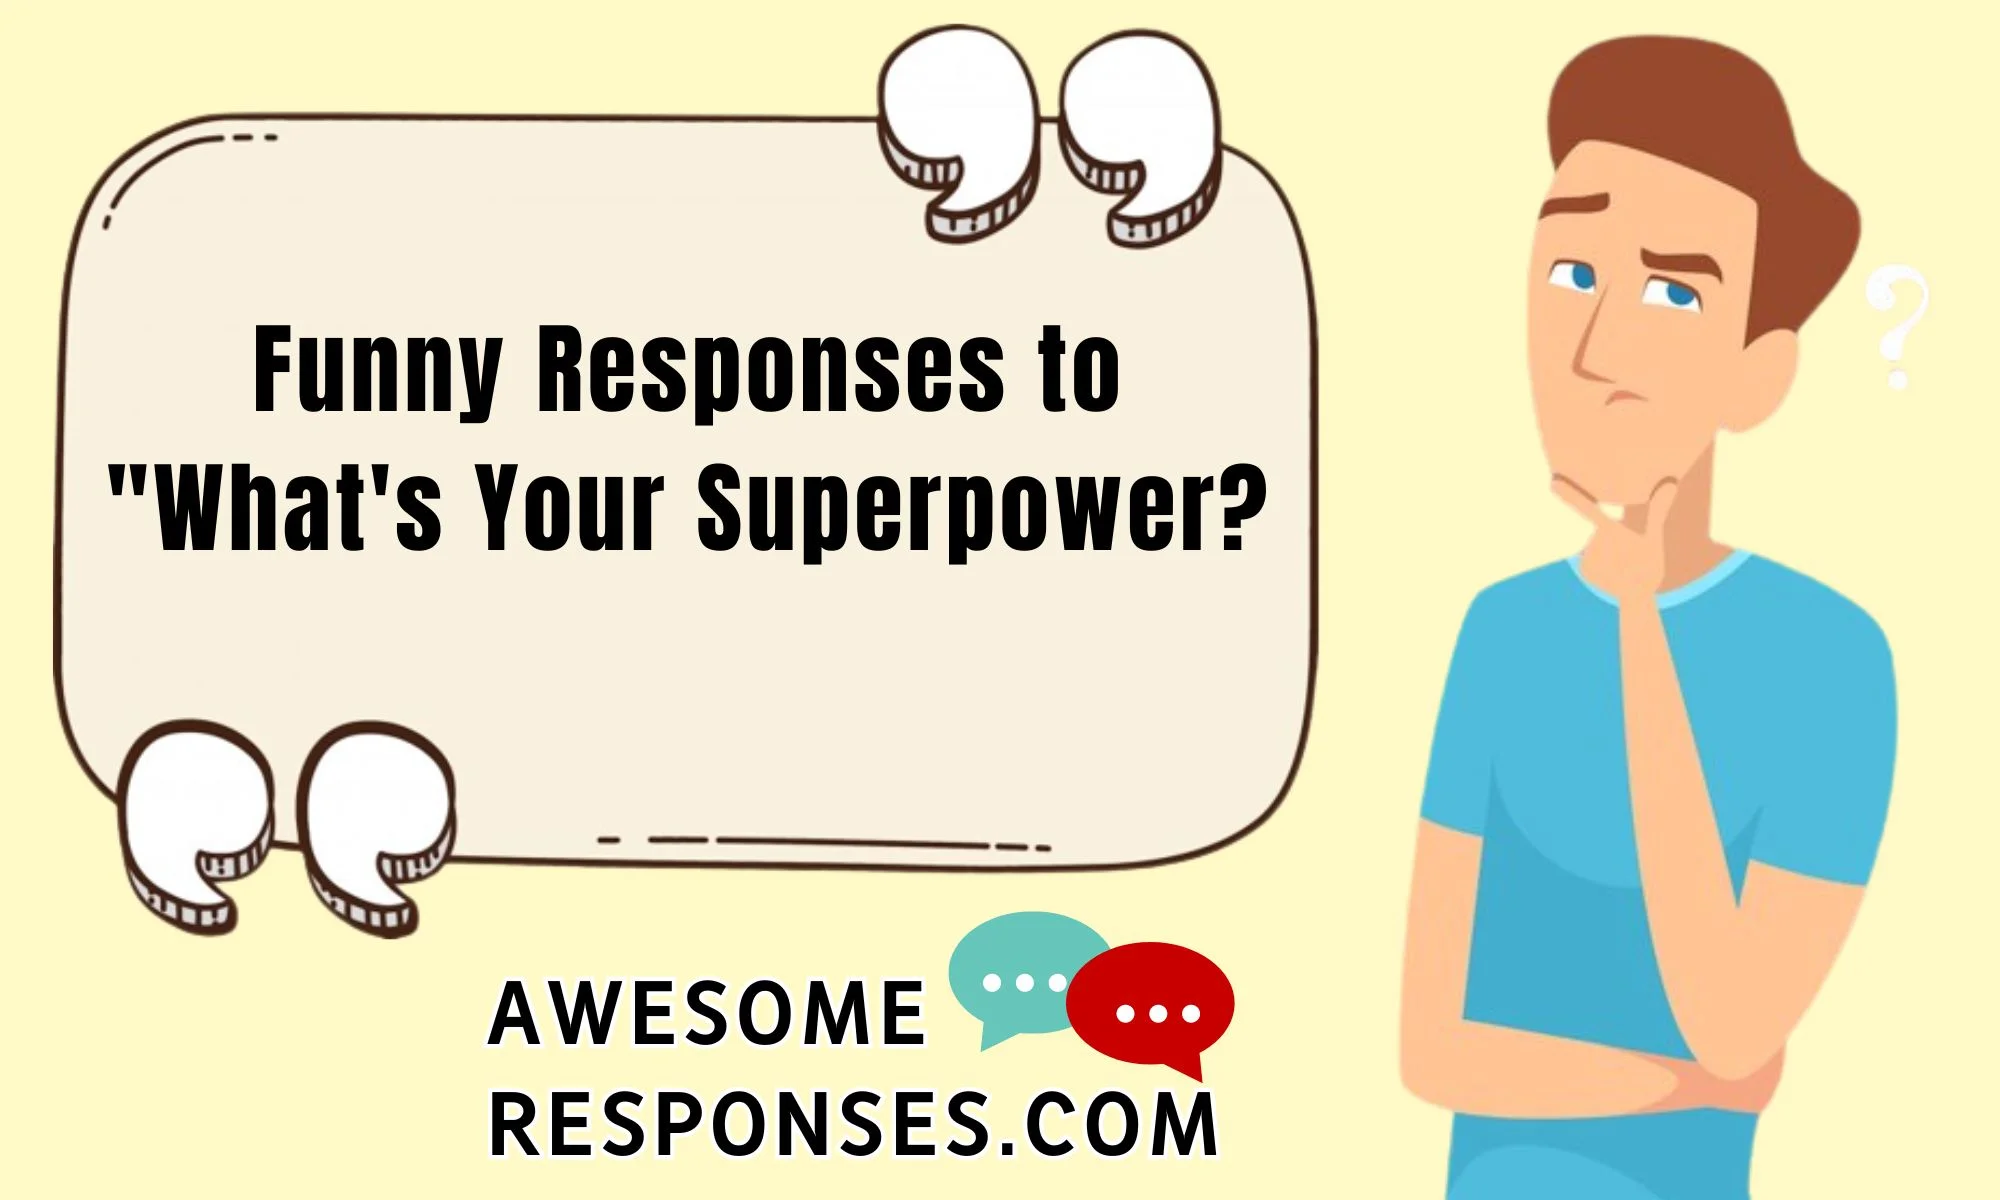 Funny Responses to "What's Your Superpower?